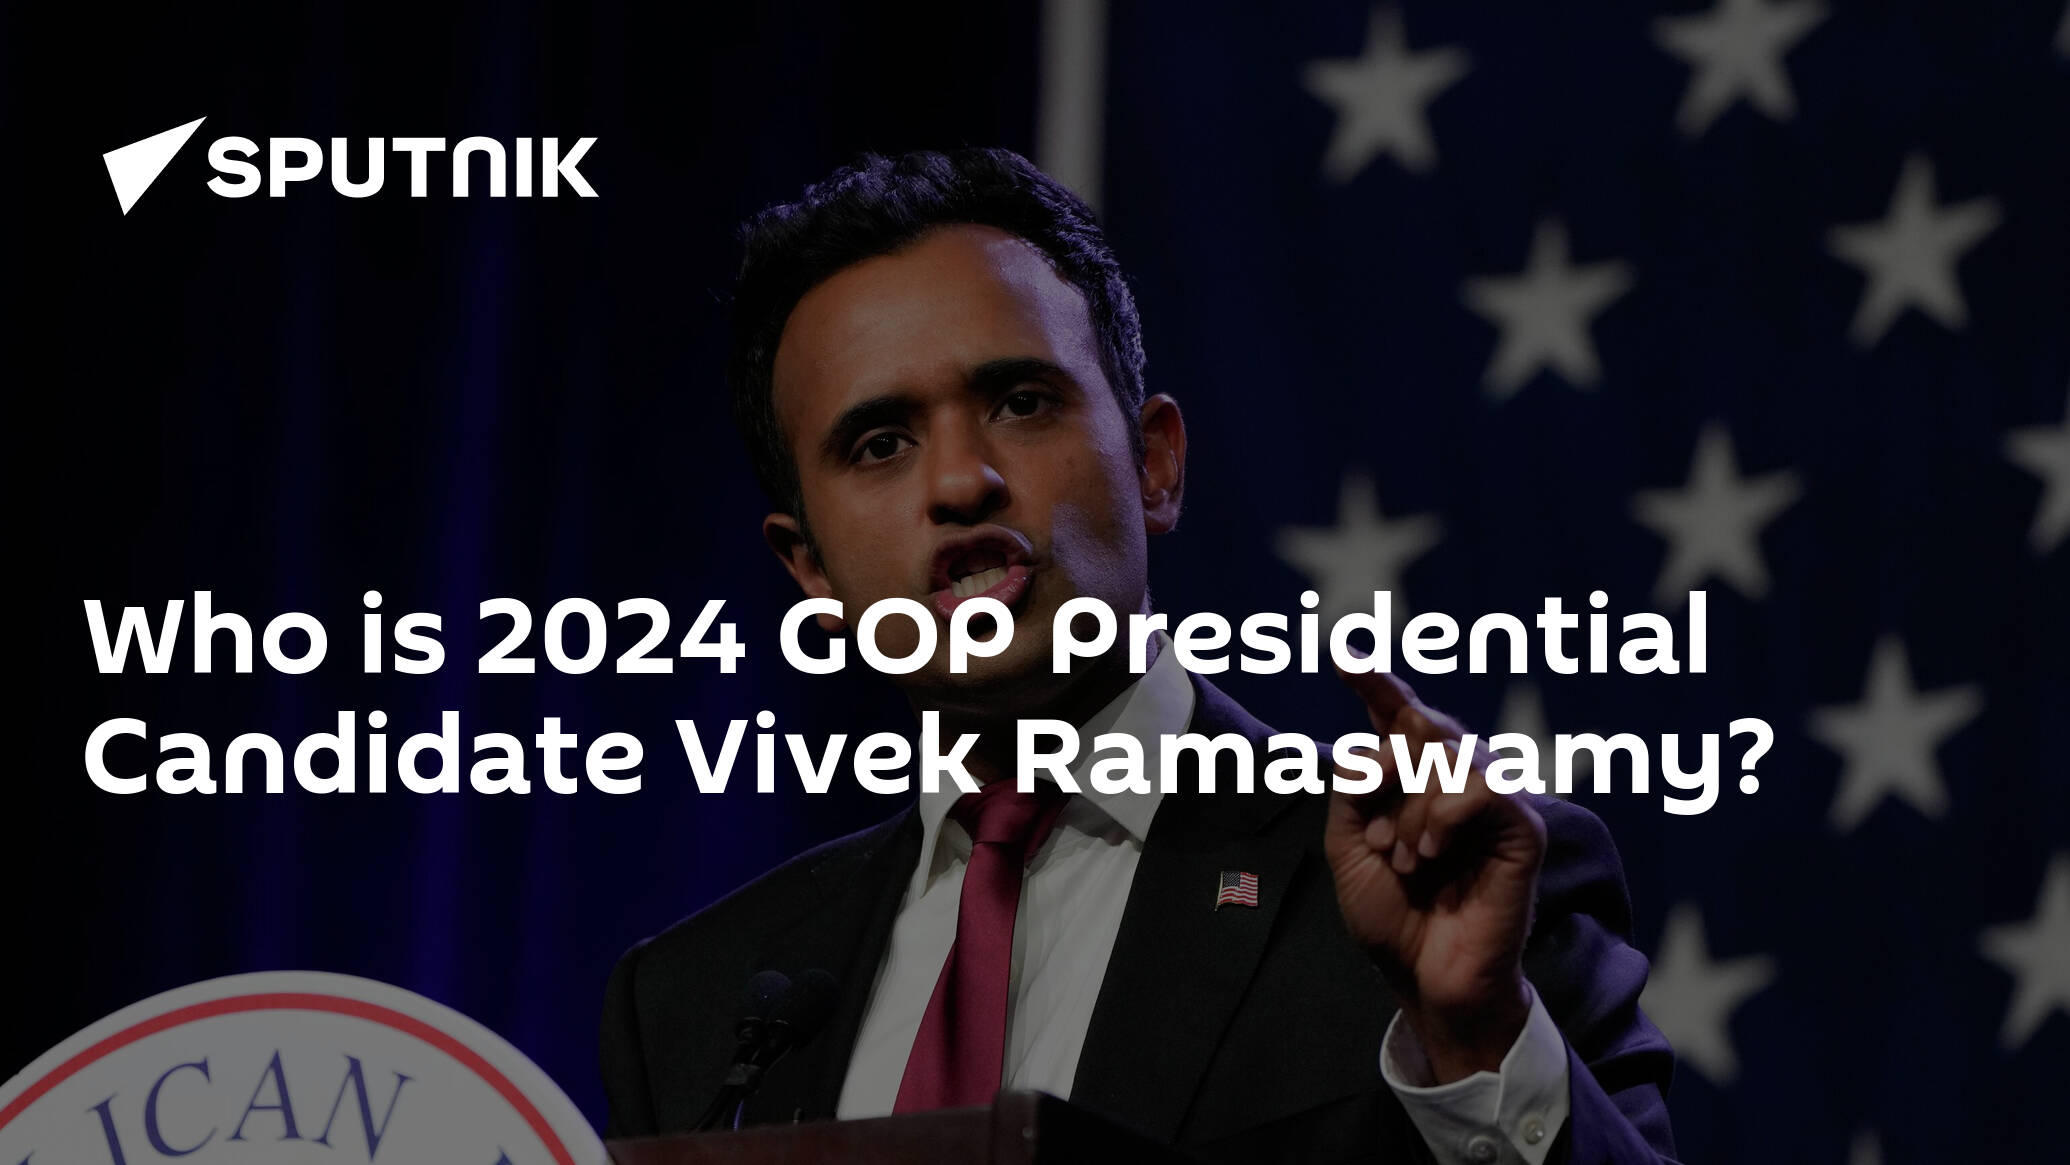 Who Is 2024 GOP Presidential Candidate Vivek Ramaswamy?